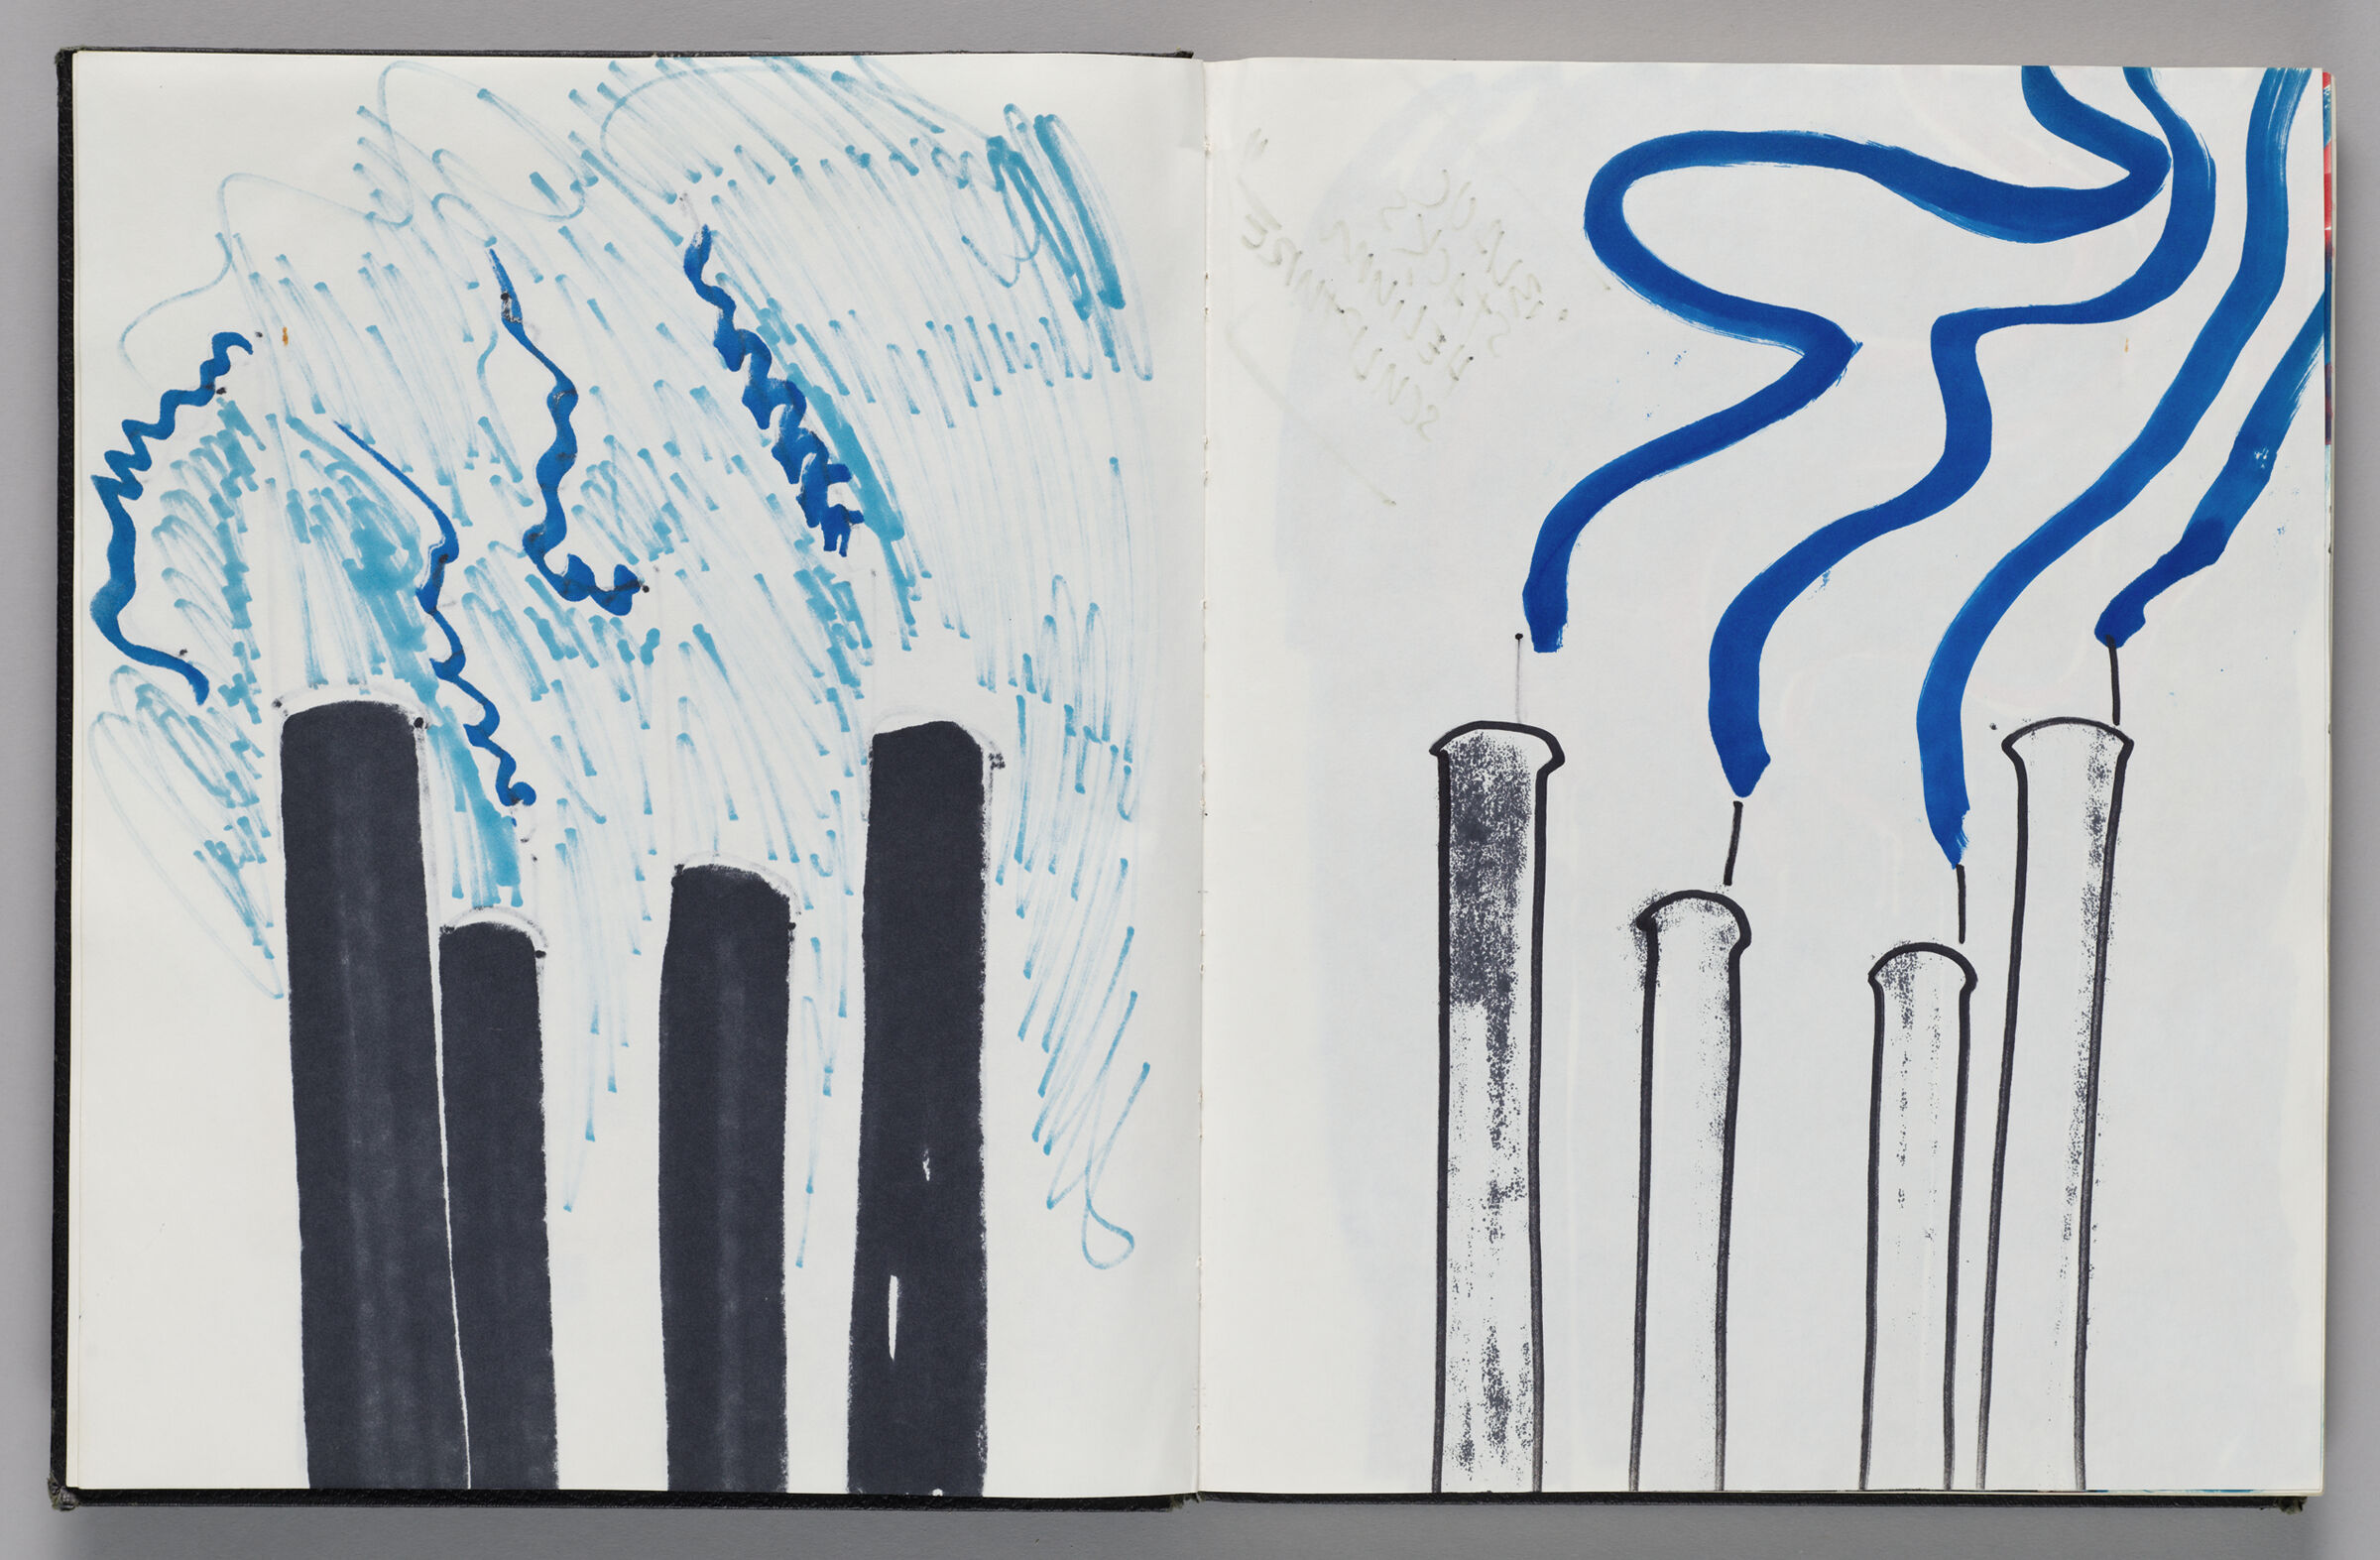 Untitled (Bleed-Through Of Previous Page, Left Page); Untitled (Designs For Wind Socks Using Color Transfer, Right Page)